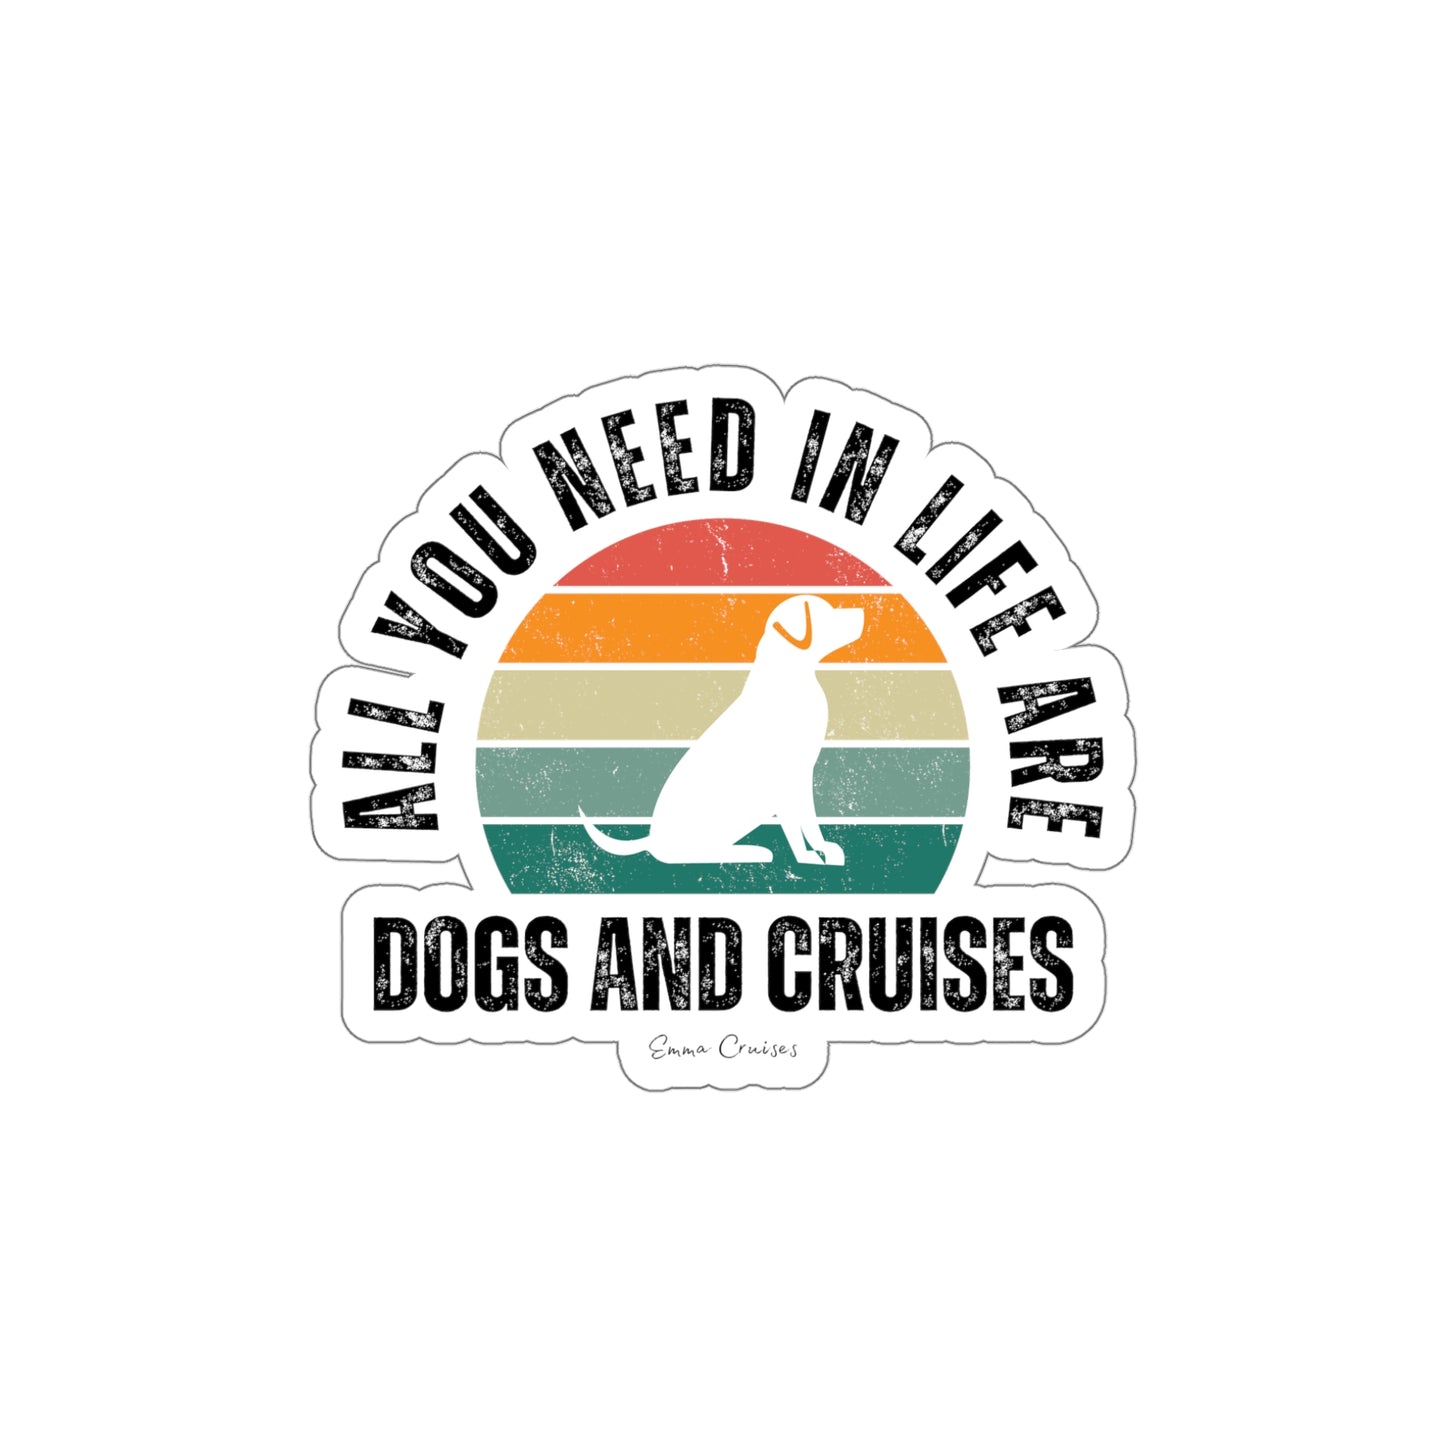 Dogs and Cruises - Die-Cut Sticker